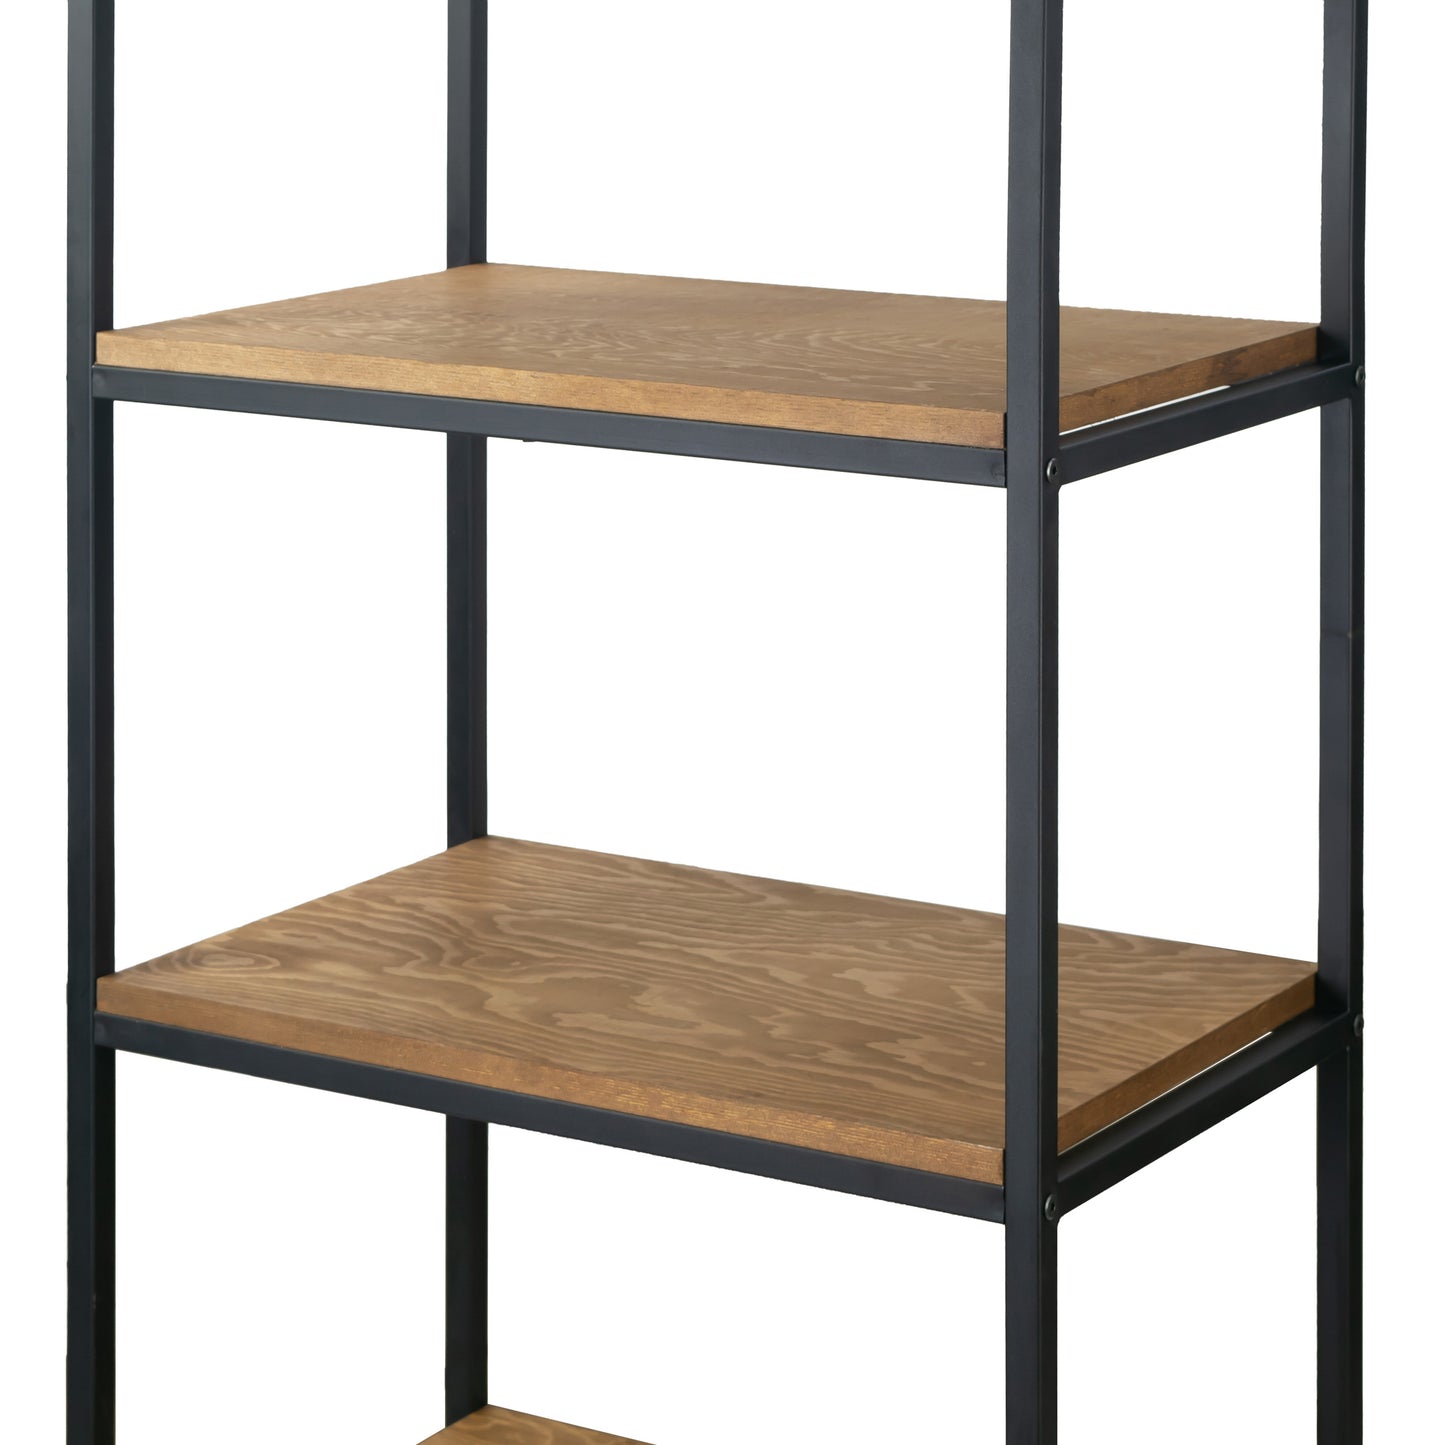 Amy Brown Pine Wood Display Shelf Etagere Metal Frame Bookcase with Drawer